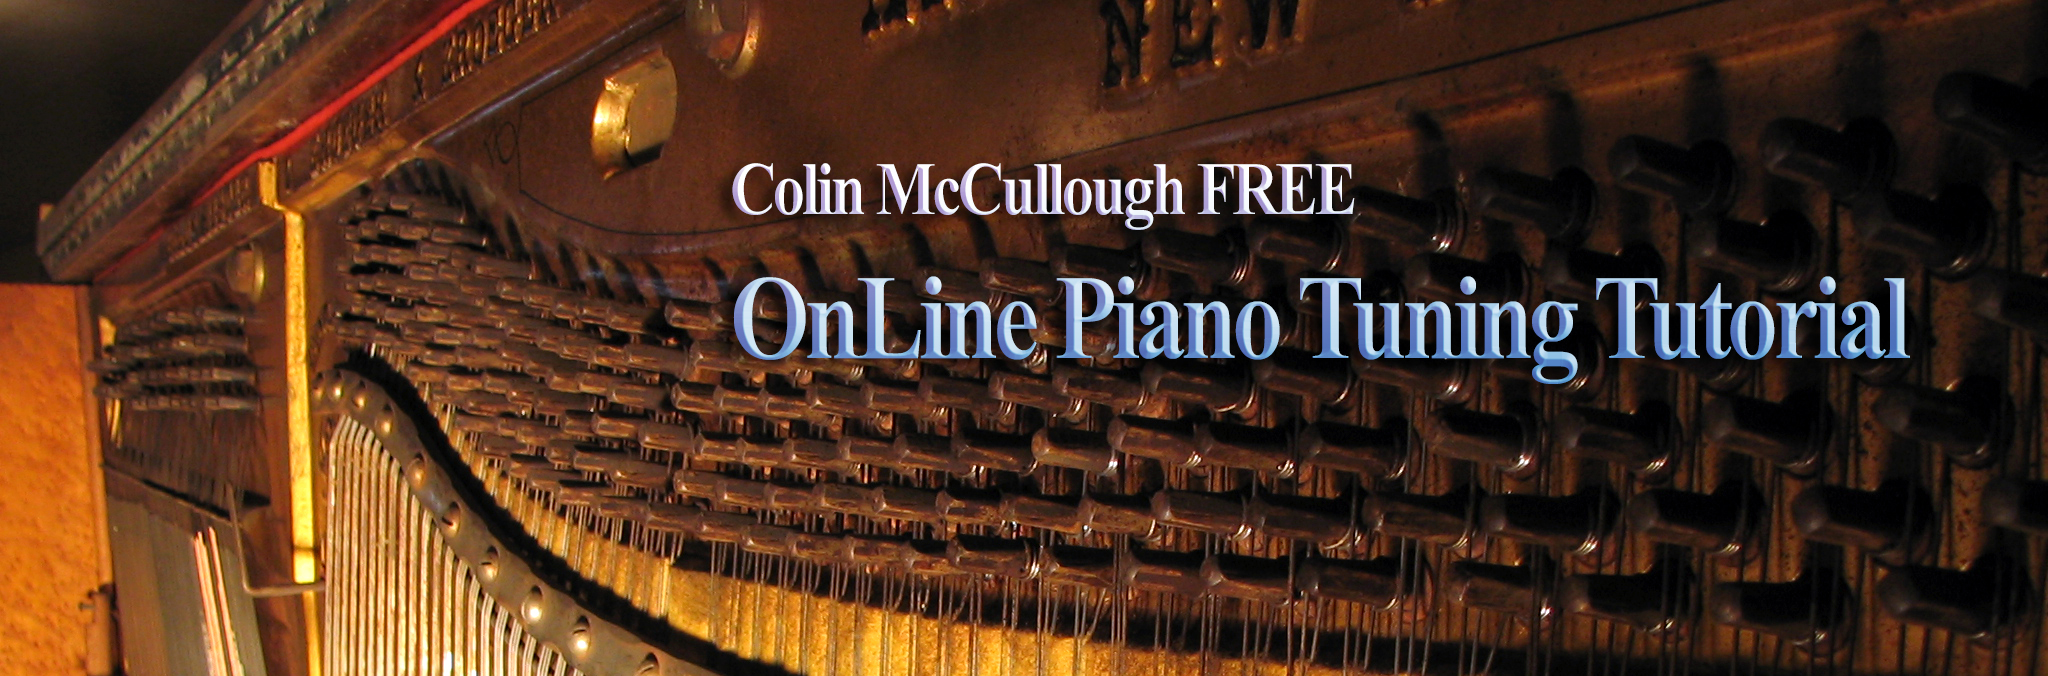 Free online piano tuning tutorial